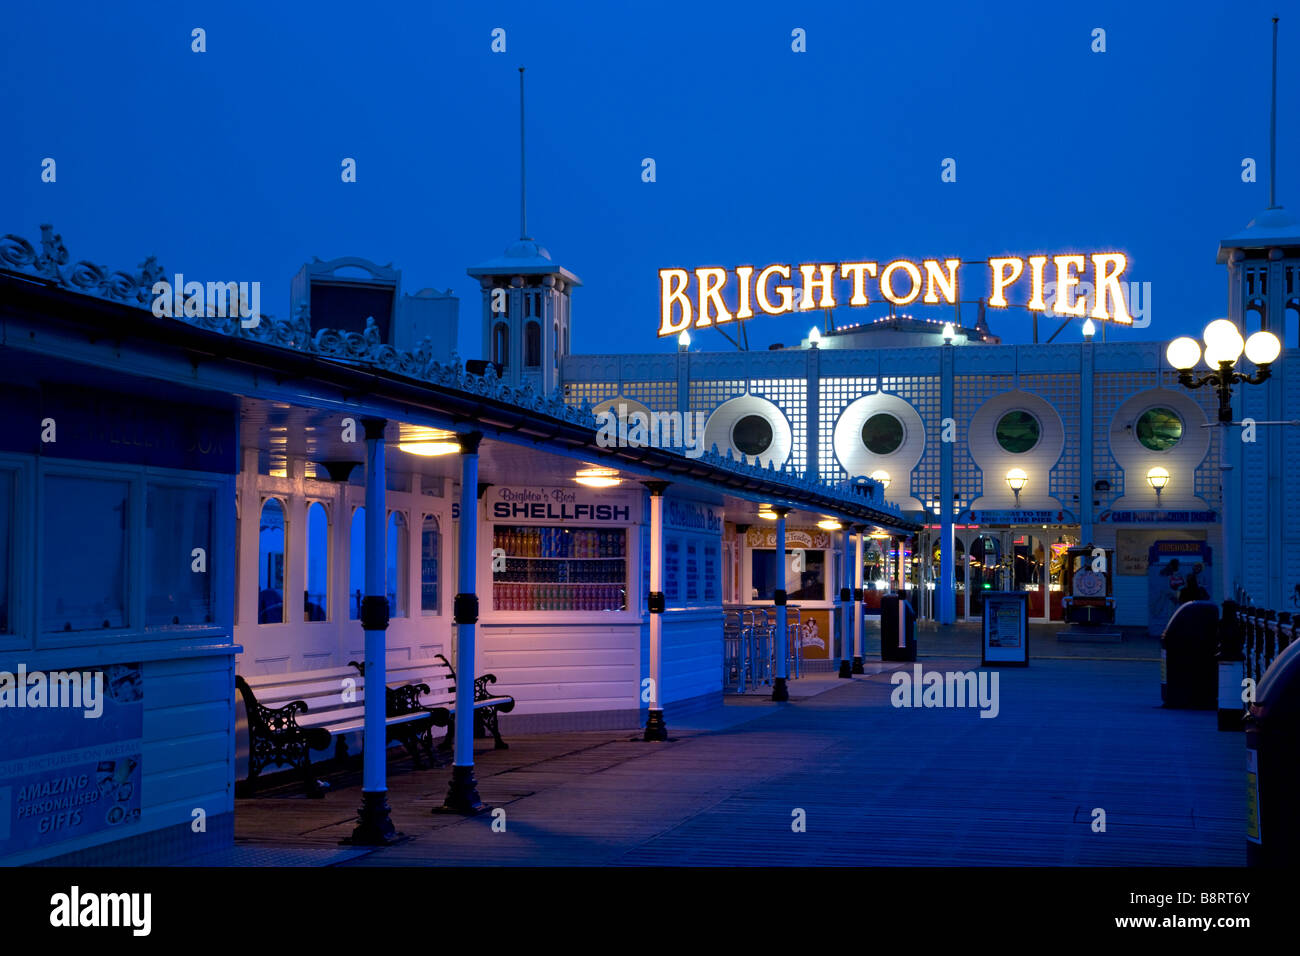 Palace Pier at night, Brighton, East Sussex, England. Stock Photo